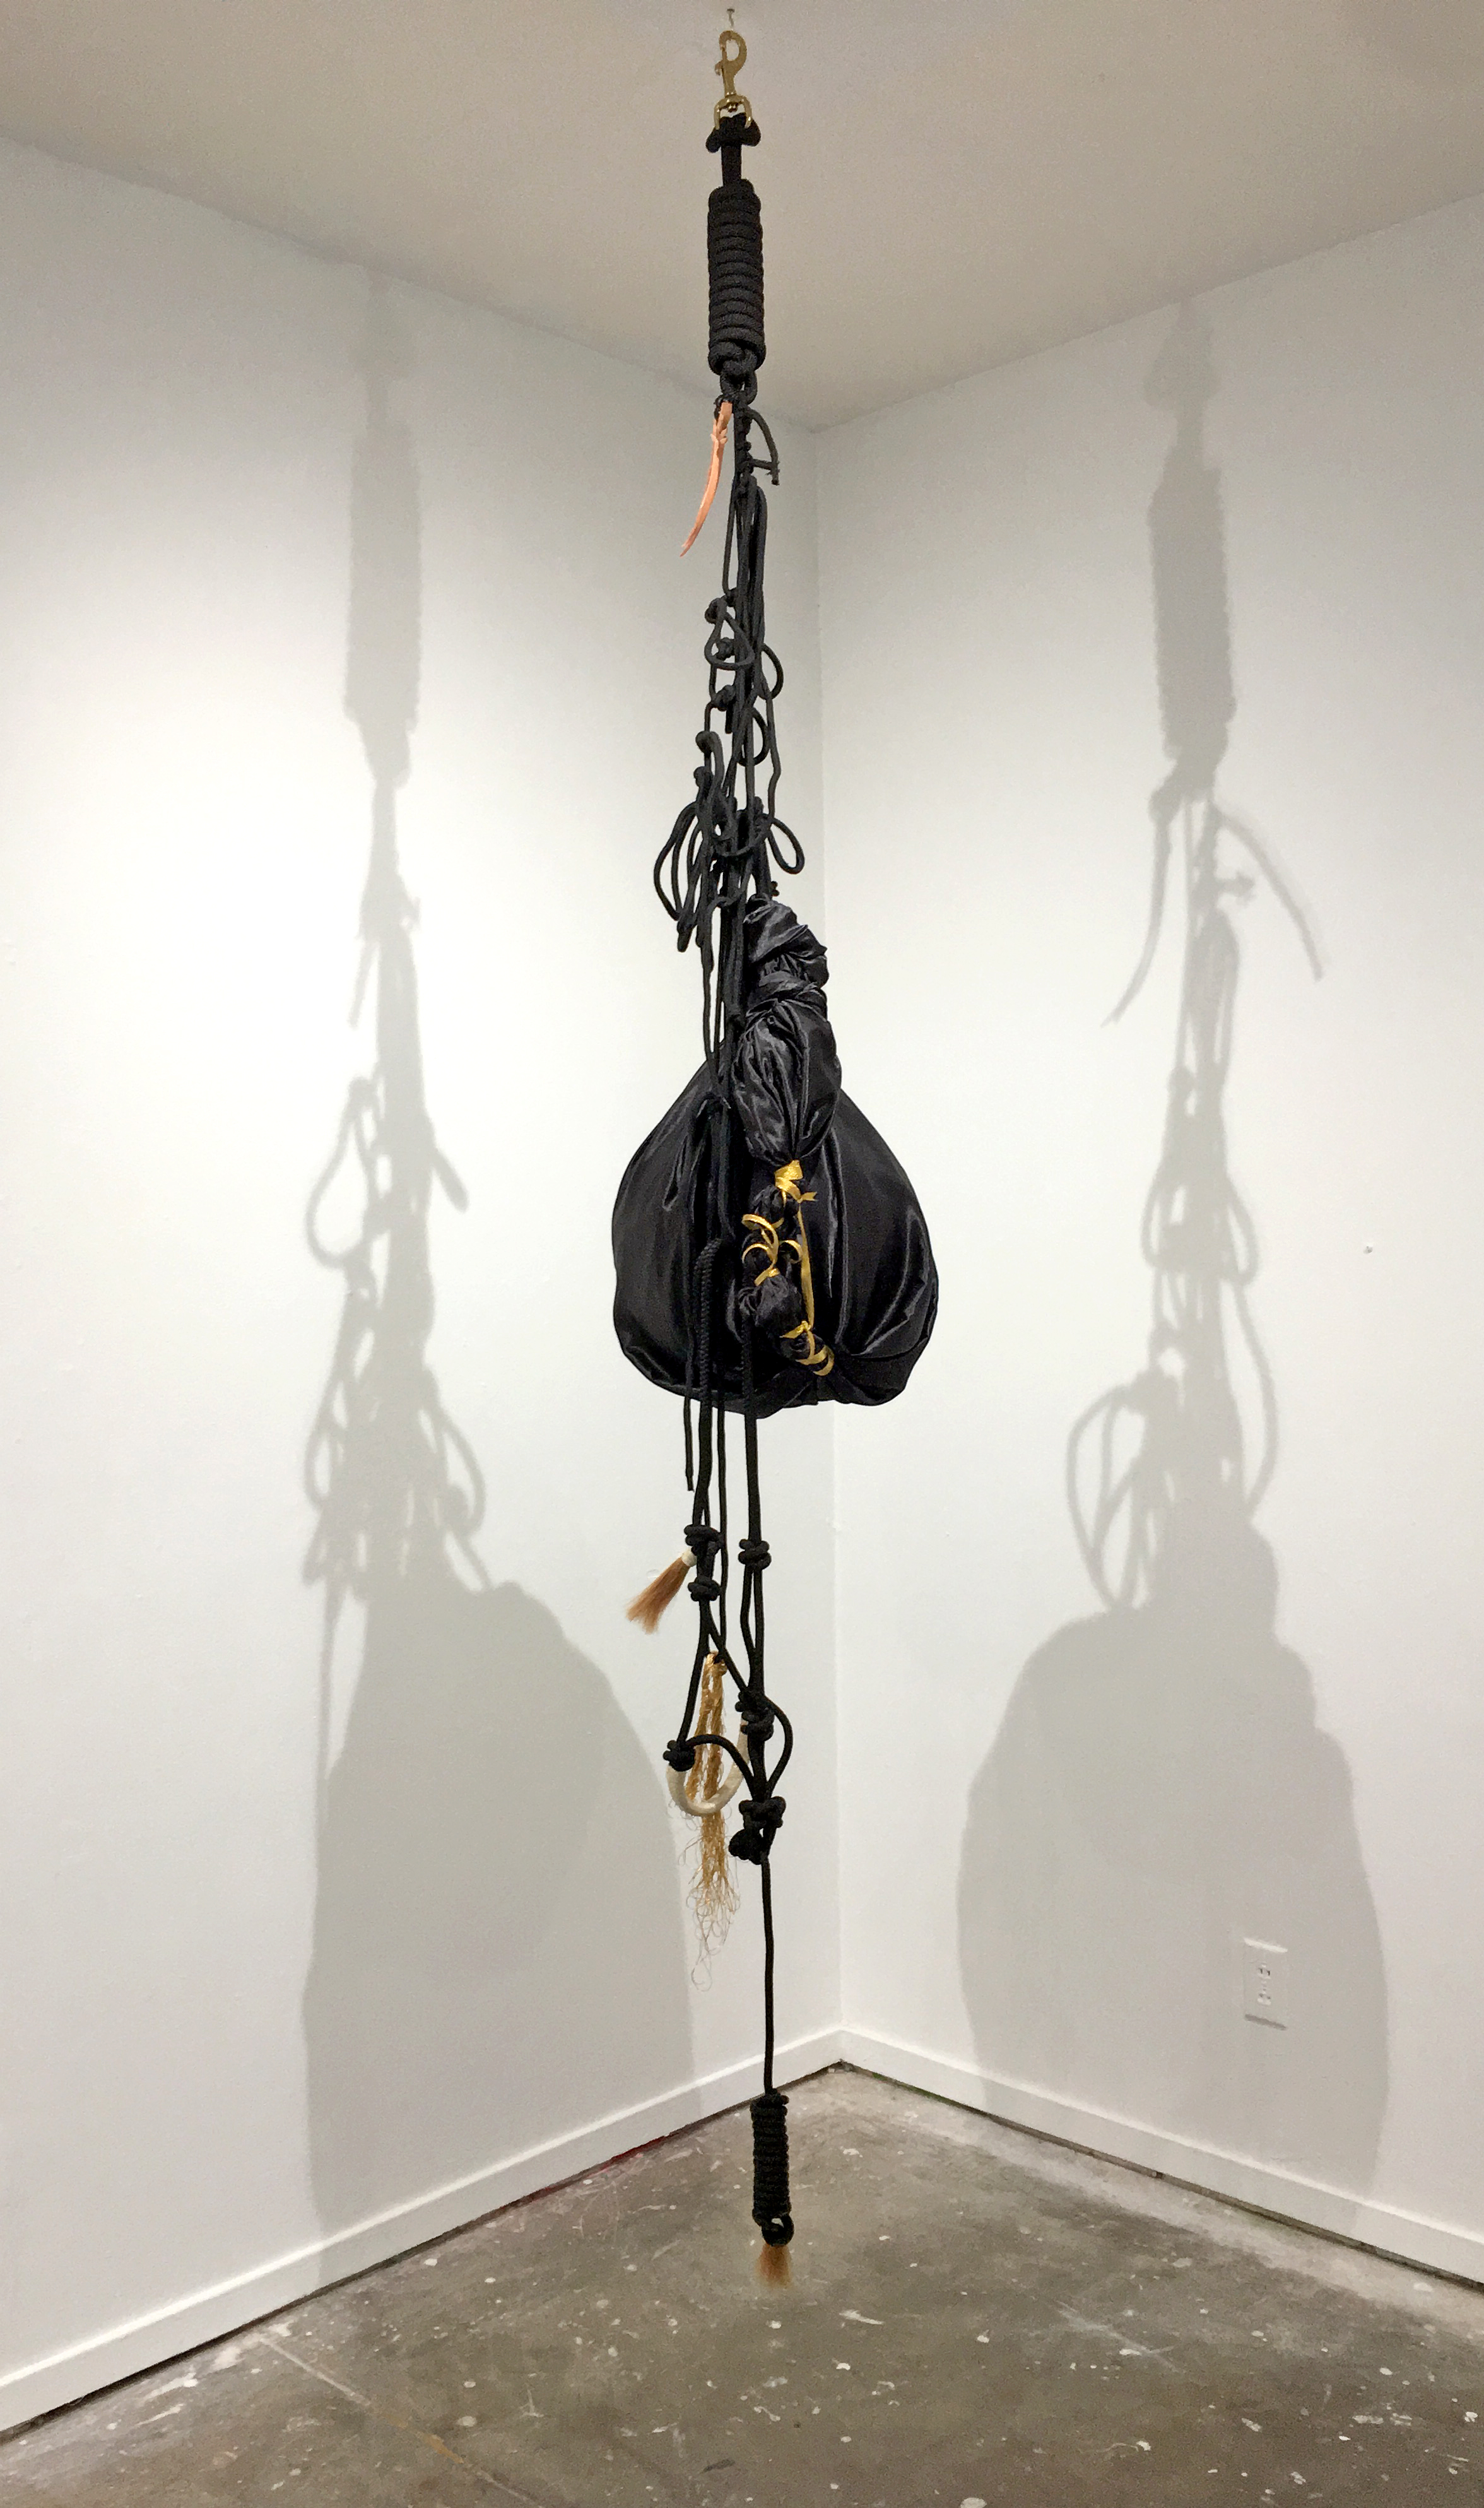   Blue Black, Benighted,   2018, Satin, horse harness, ribbon, rope, beach ball, Dimensions variable 